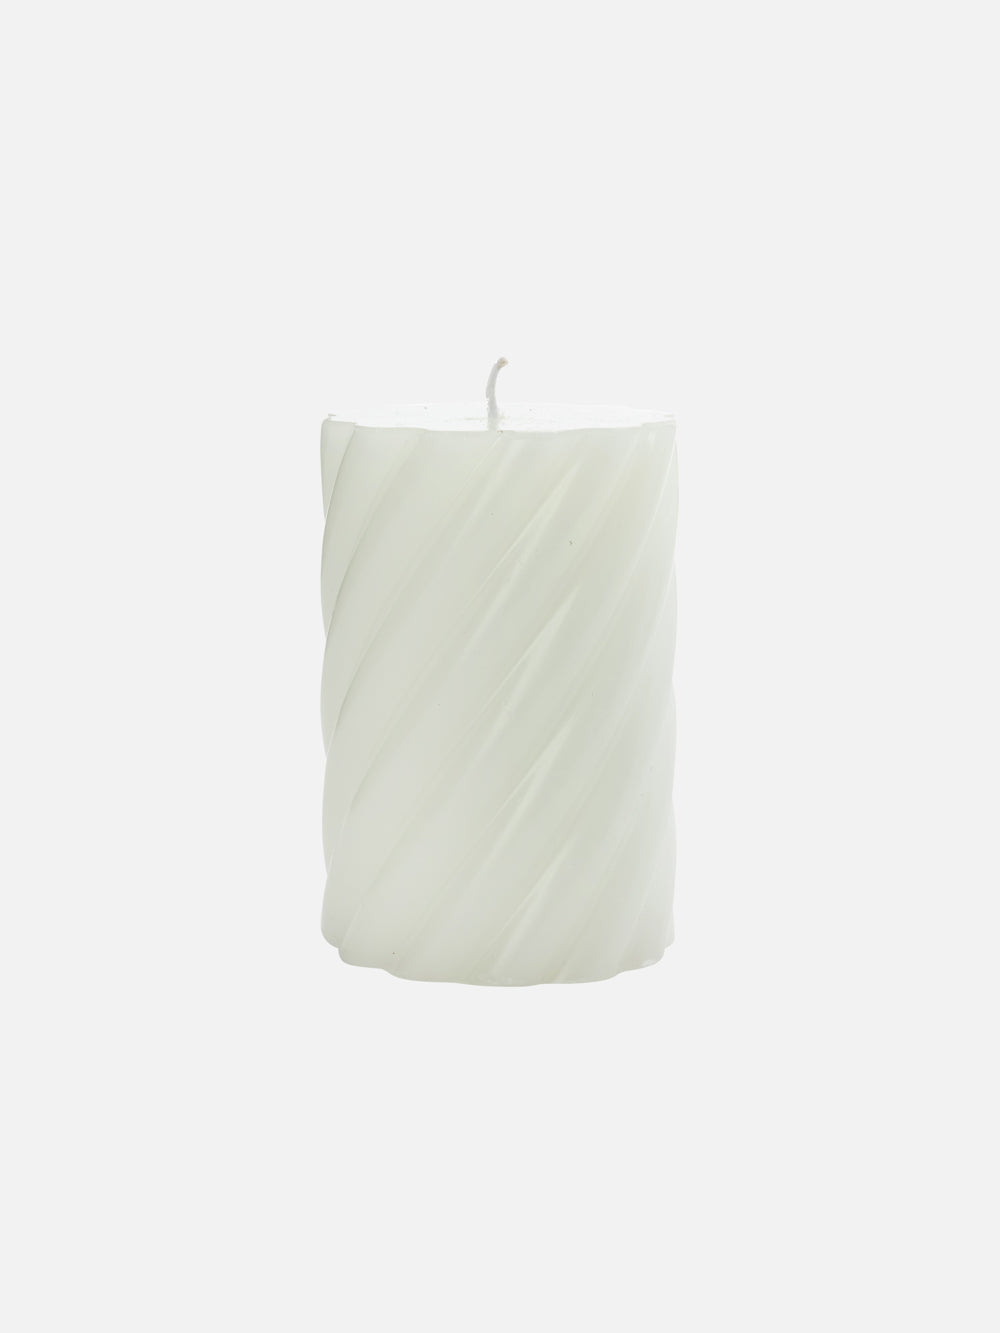 Scented Pillar Candle